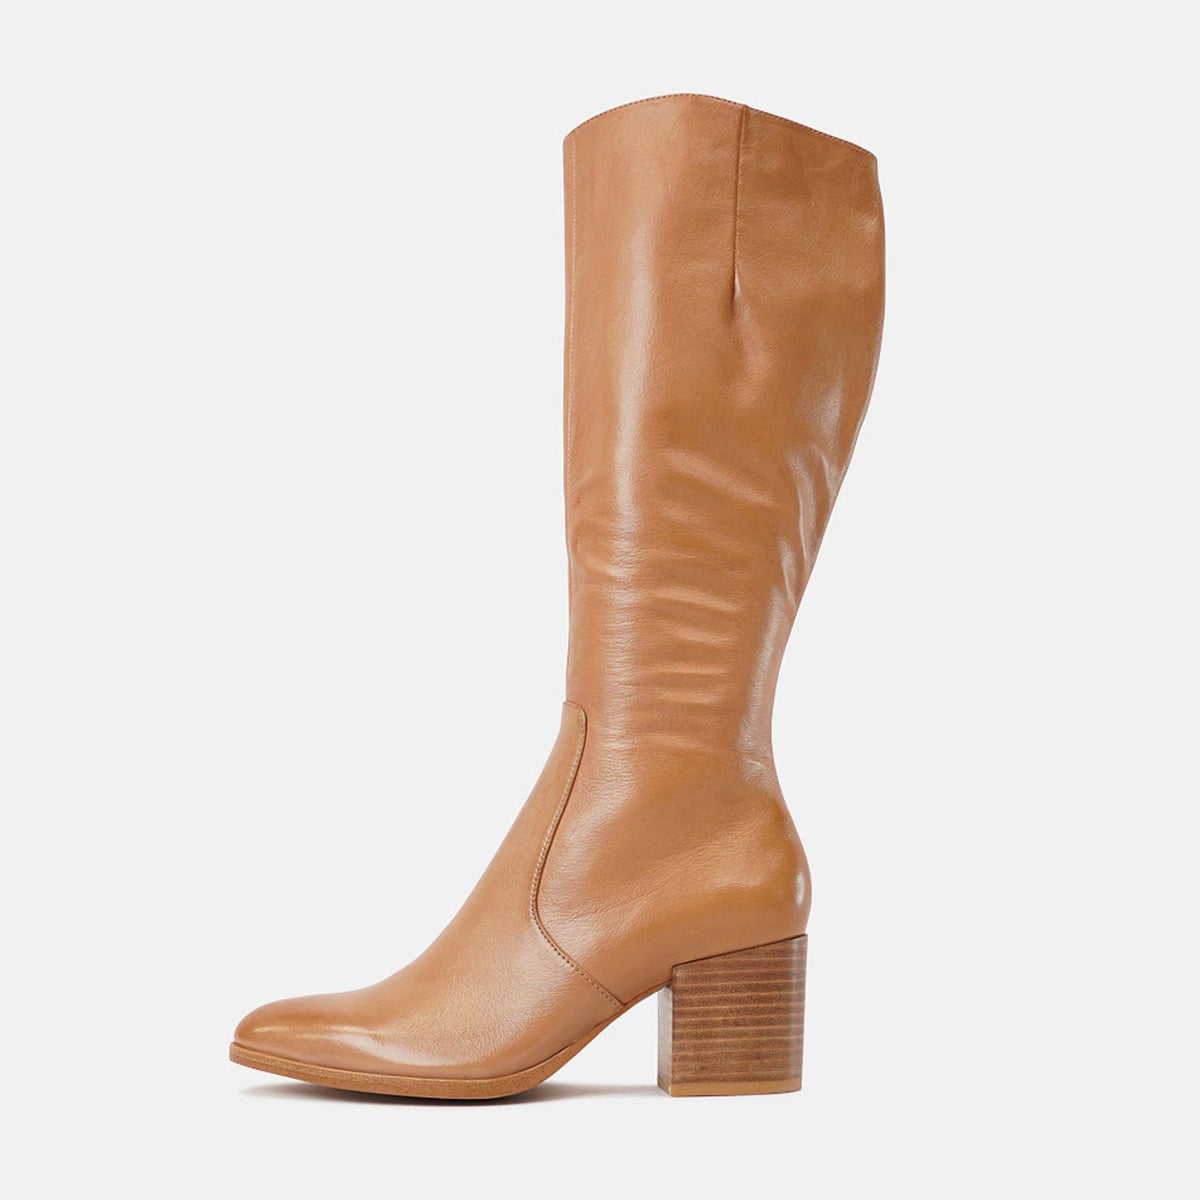 Zodiak Tan/Natural Leather Knee High Boots